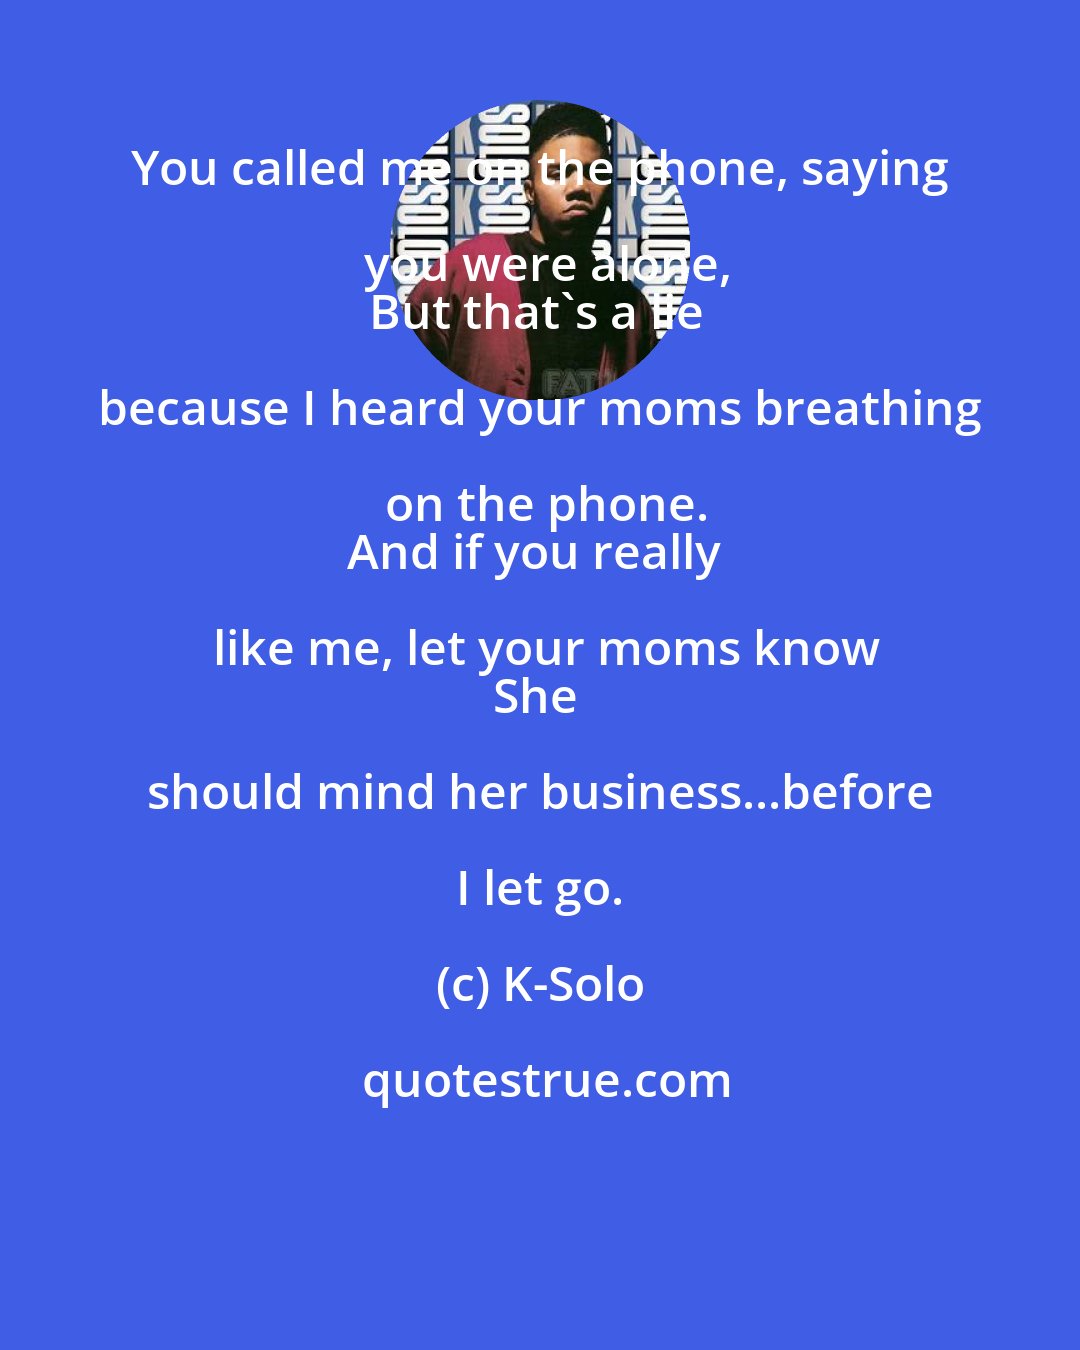 K-Solo: You called me on the phone, saying you were alone,
But that's a lie because I heard your moms breathing on the phone.
And if you really like me, let your moms know
She should mind her business...before I let go.